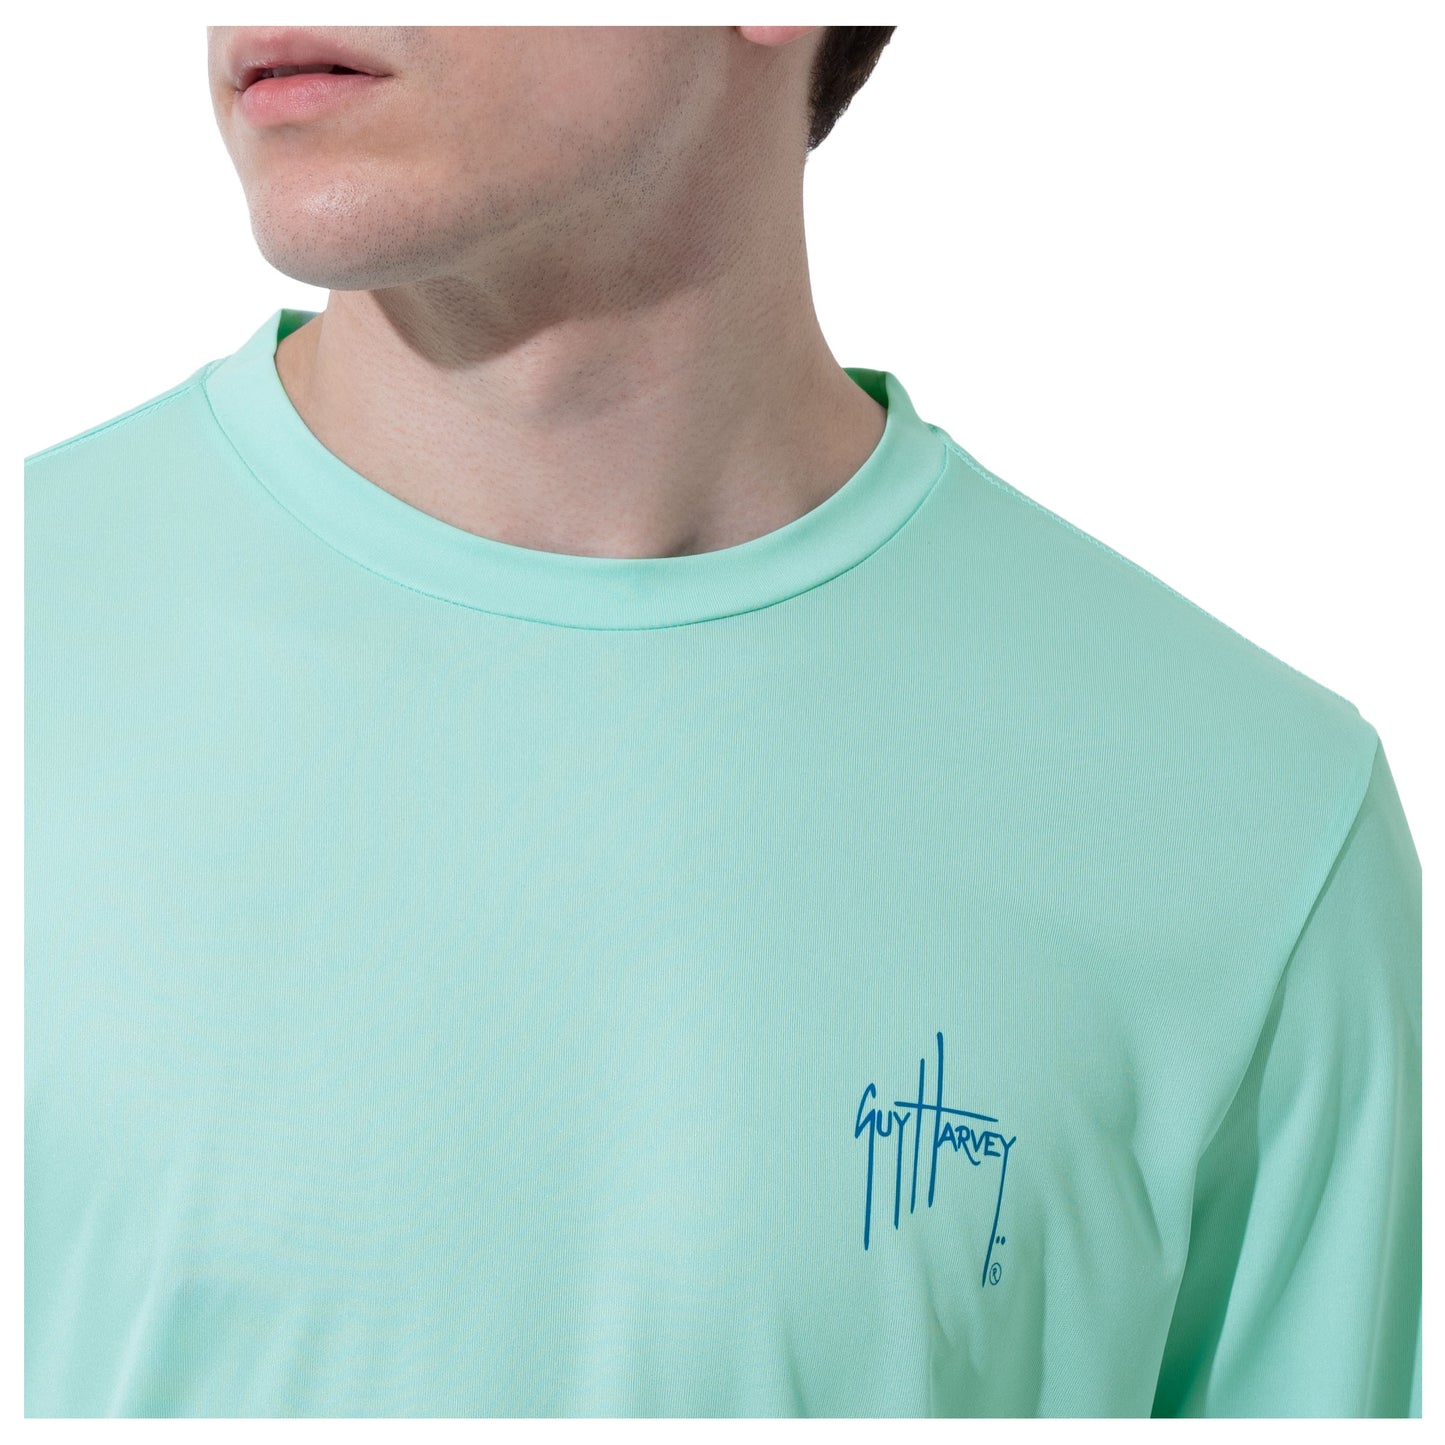 Men Long Sleeve Performance Fishing Sun Protection with UPF 50 Plus. Color Green Guy Harvey signature on the chest